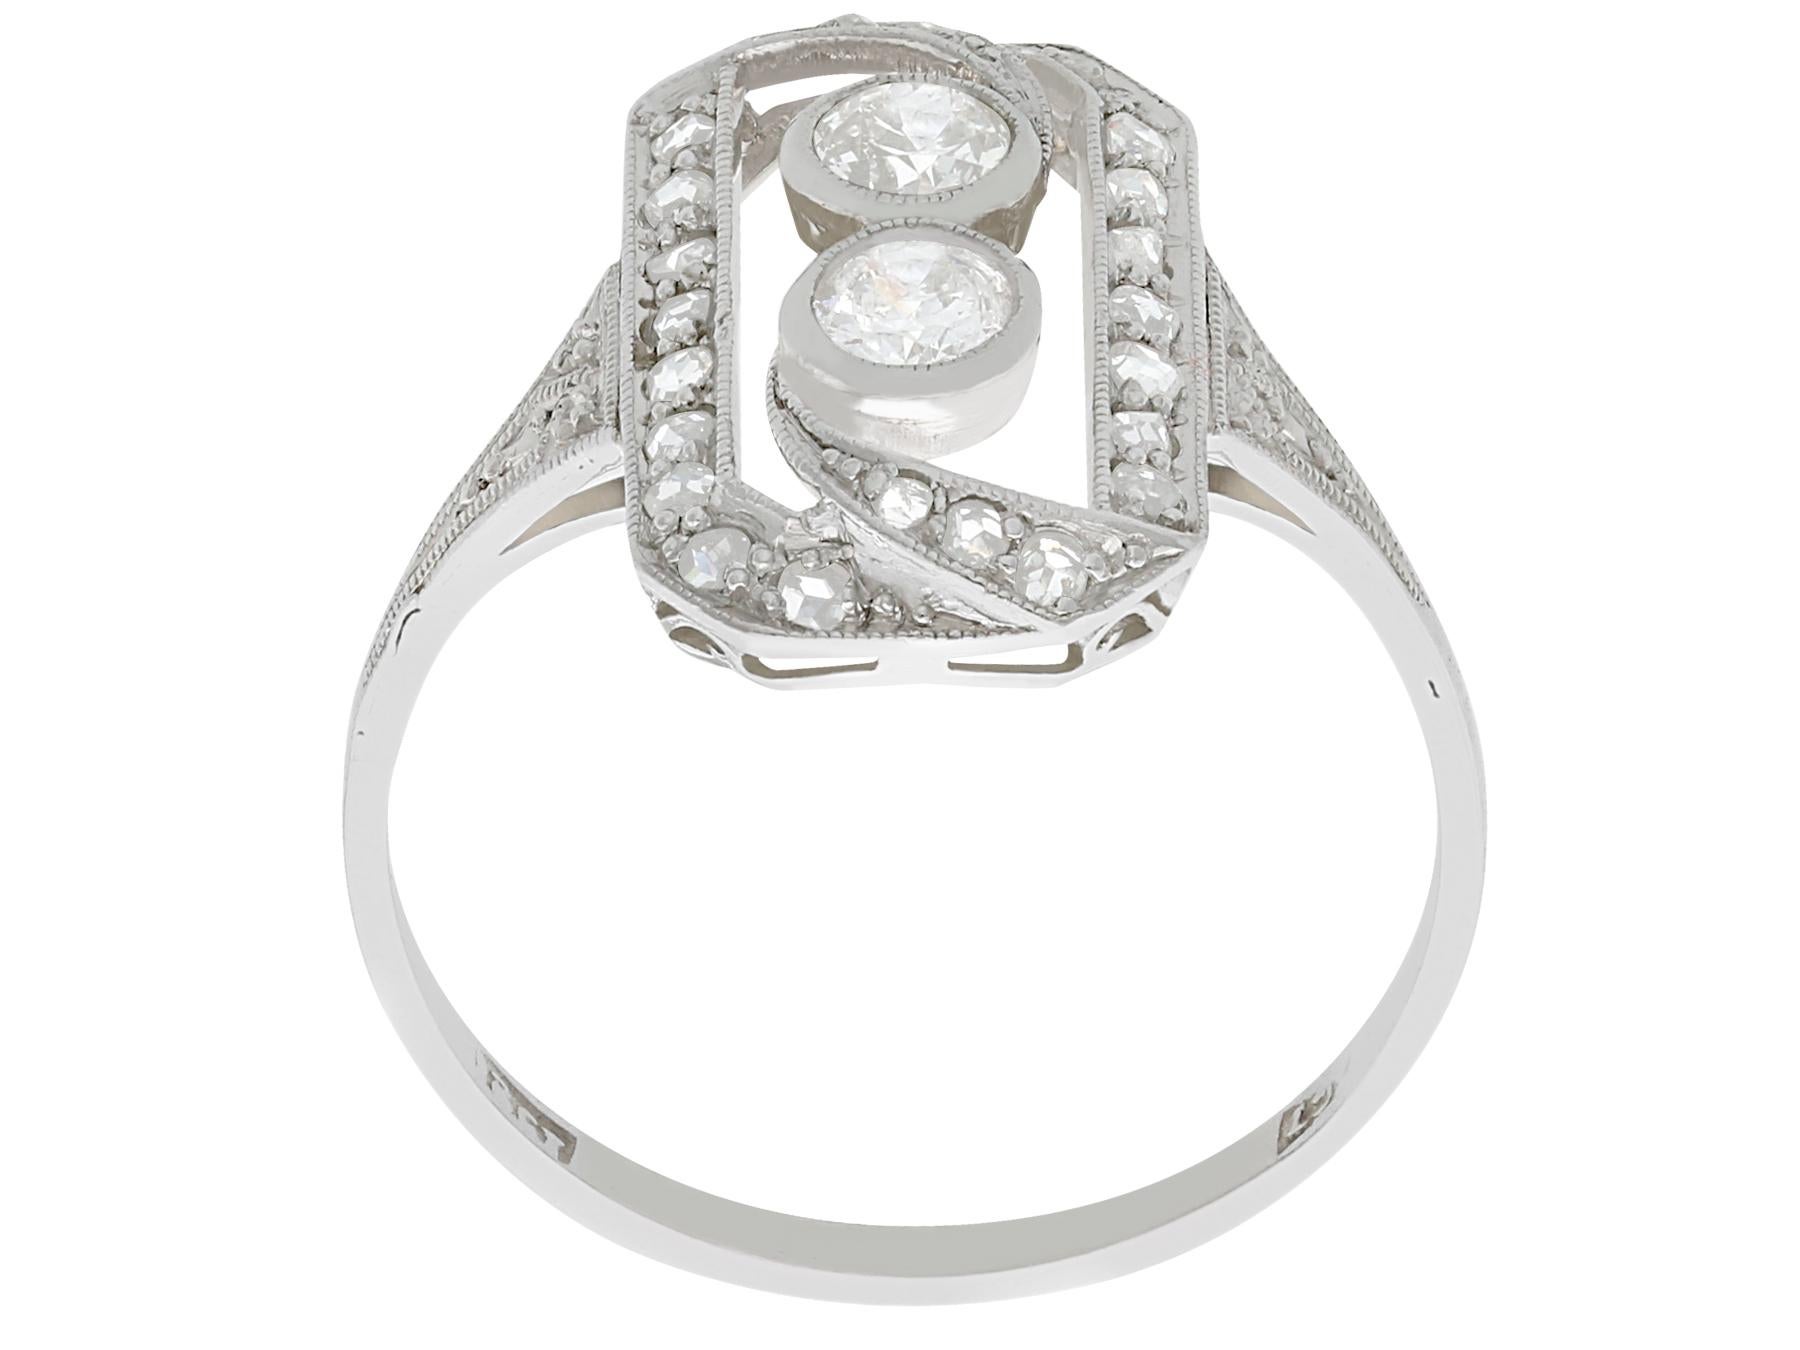 Antique Diamond and White Gold Cocktail Ring Circa 1920 In Excellent Condition For Sale In Jesmond, Newcastle Upon Tyne